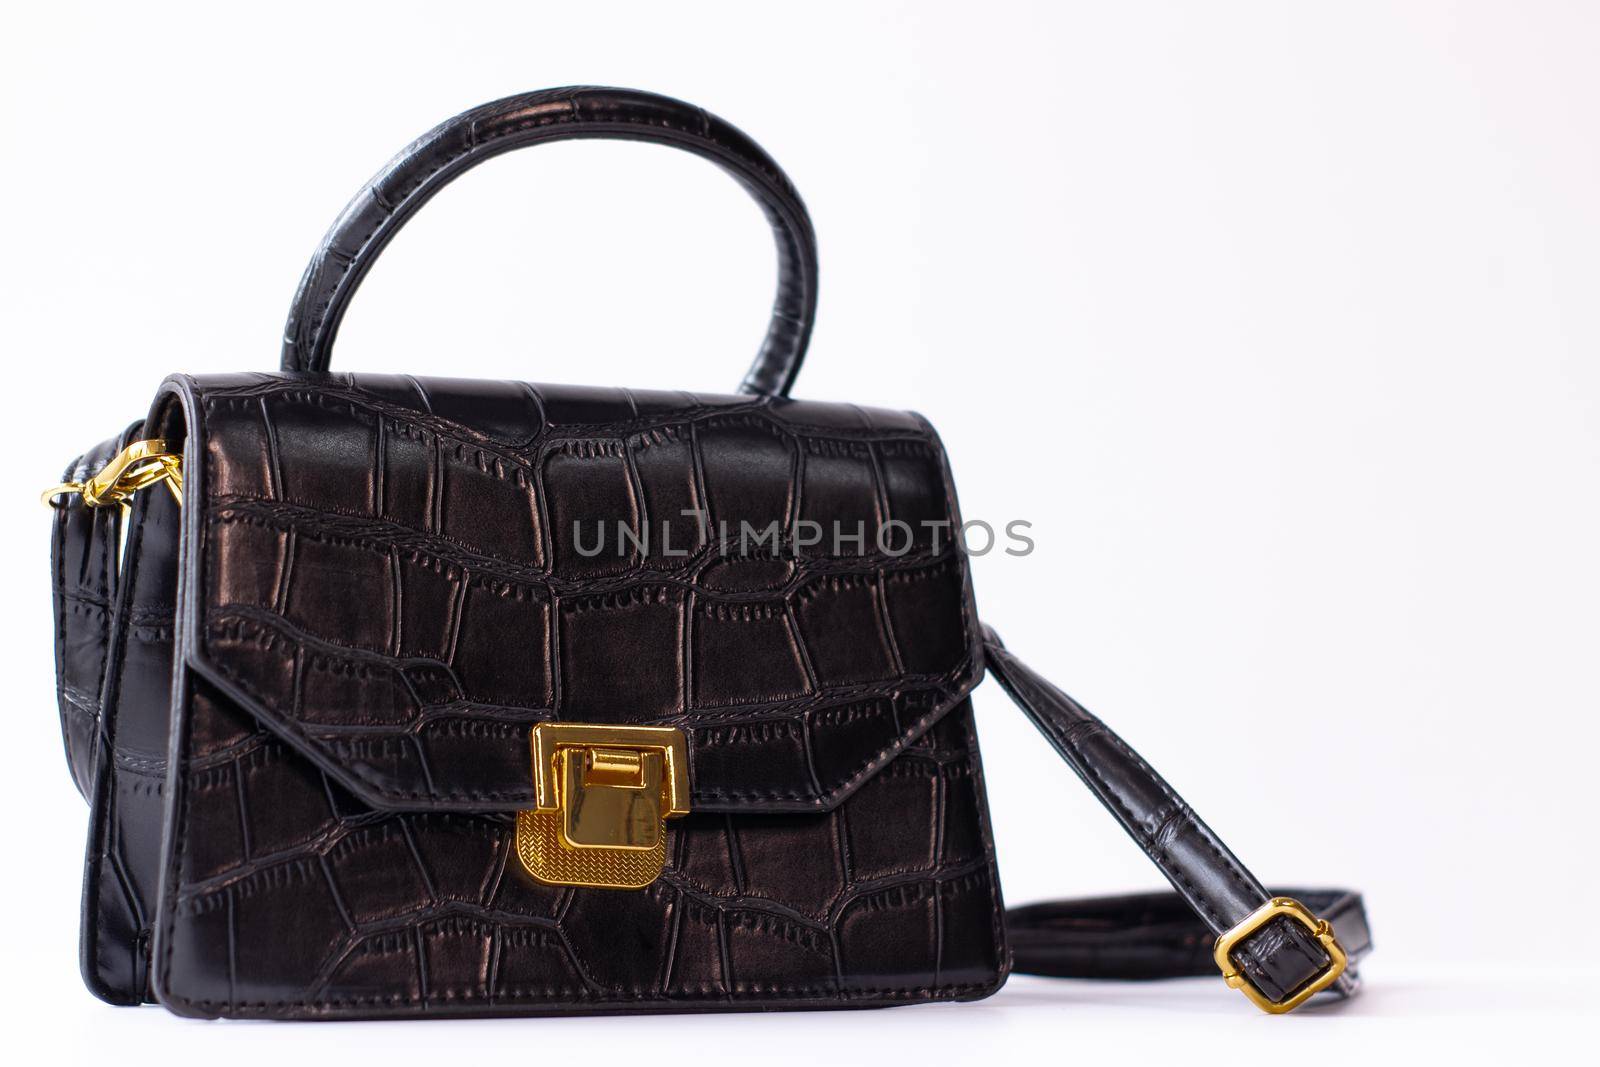 trendy black leather handbag isolated on white background. Product photography. bags and purses for women.